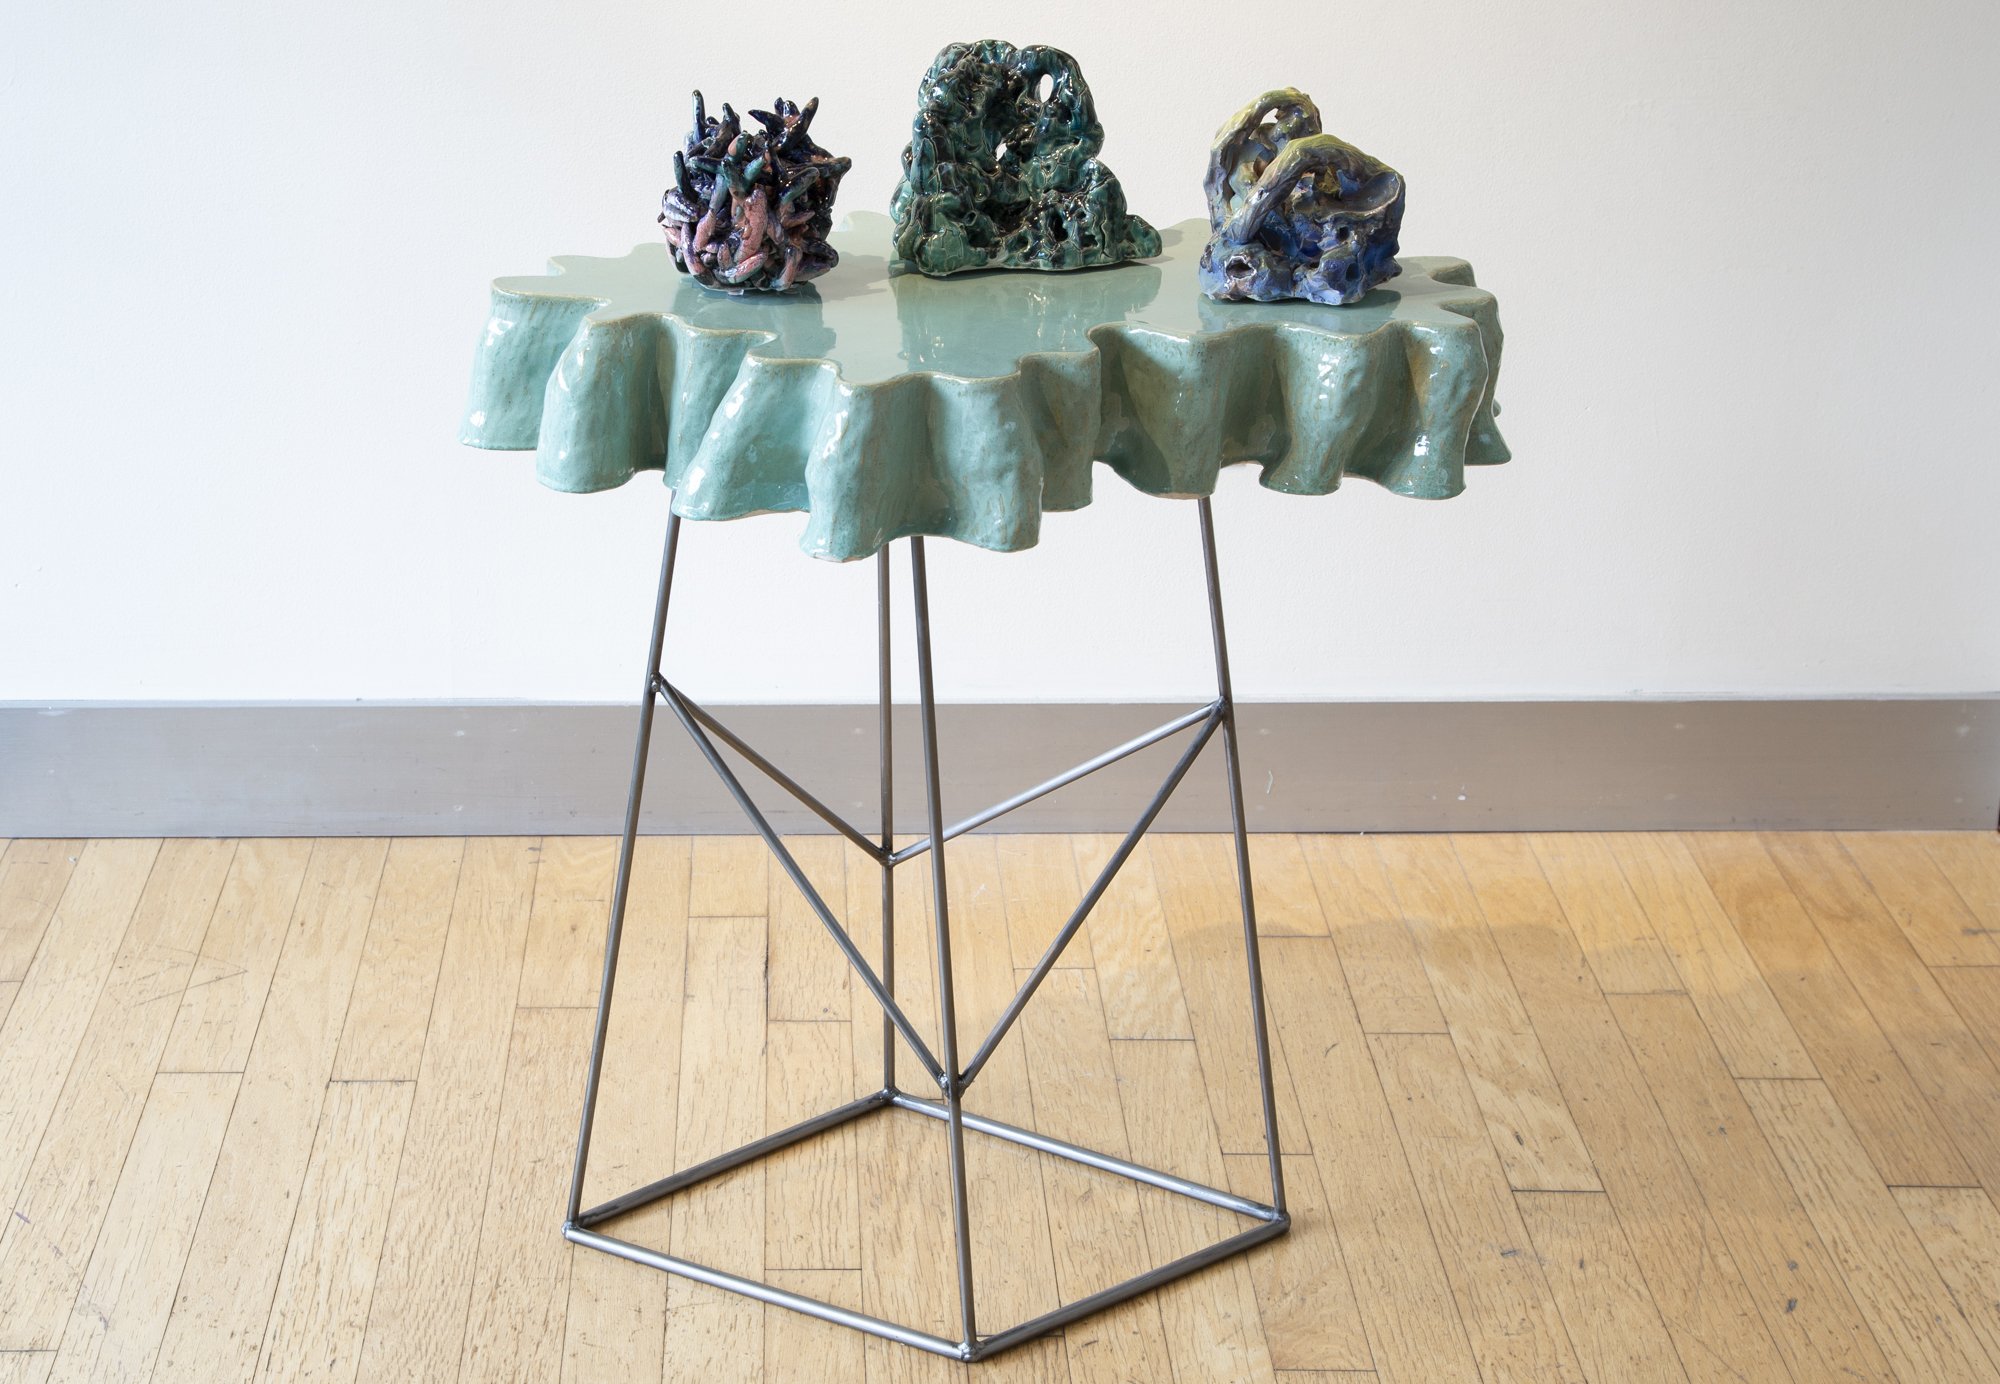  Floating World Side Table Ceramic, Steel 31” x 30” x 20” 2019  